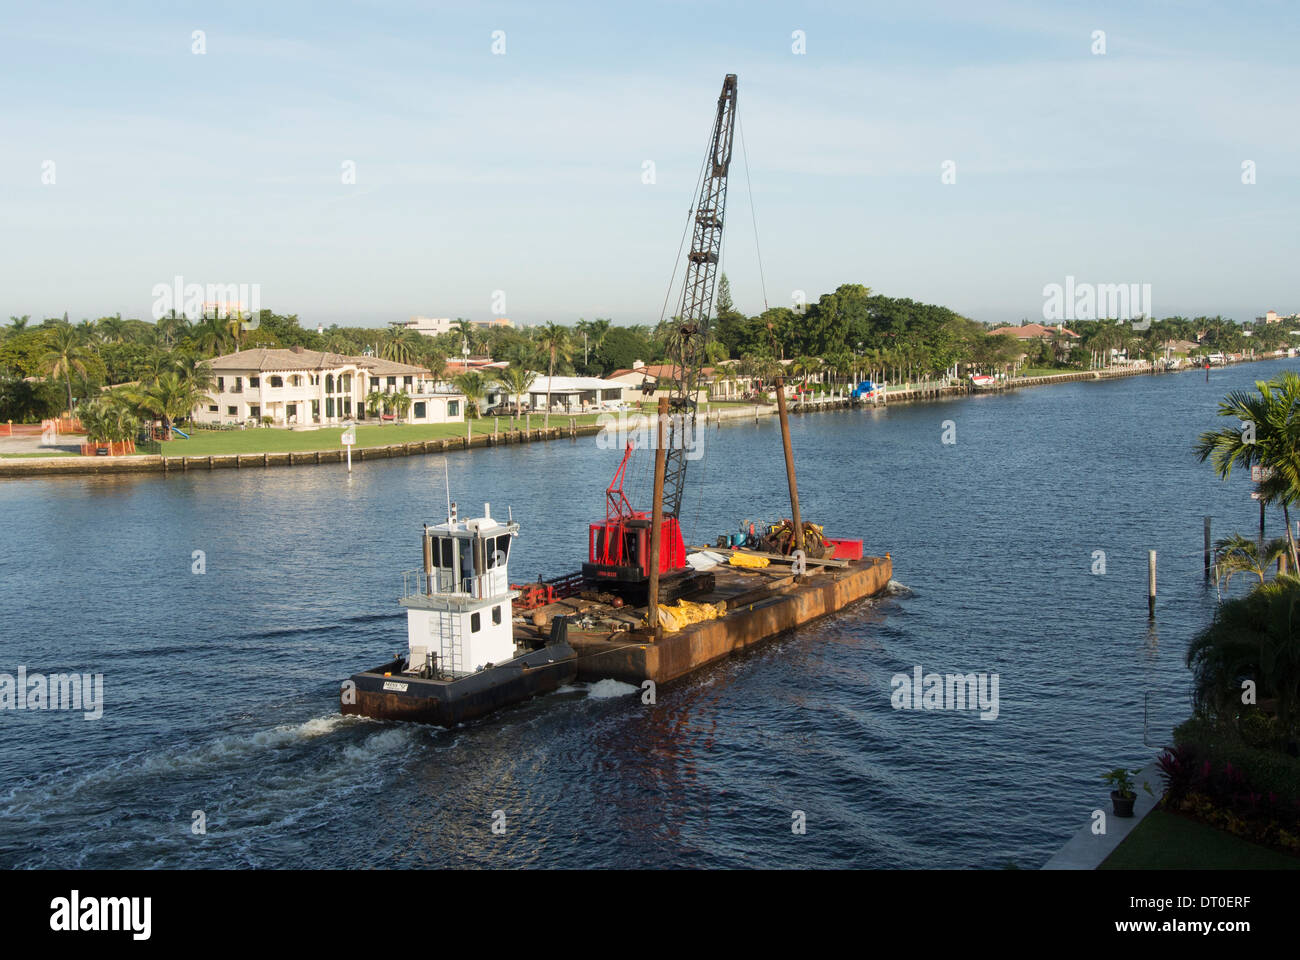 Pile driver barge on Intracoastal waterway. Stock Photo